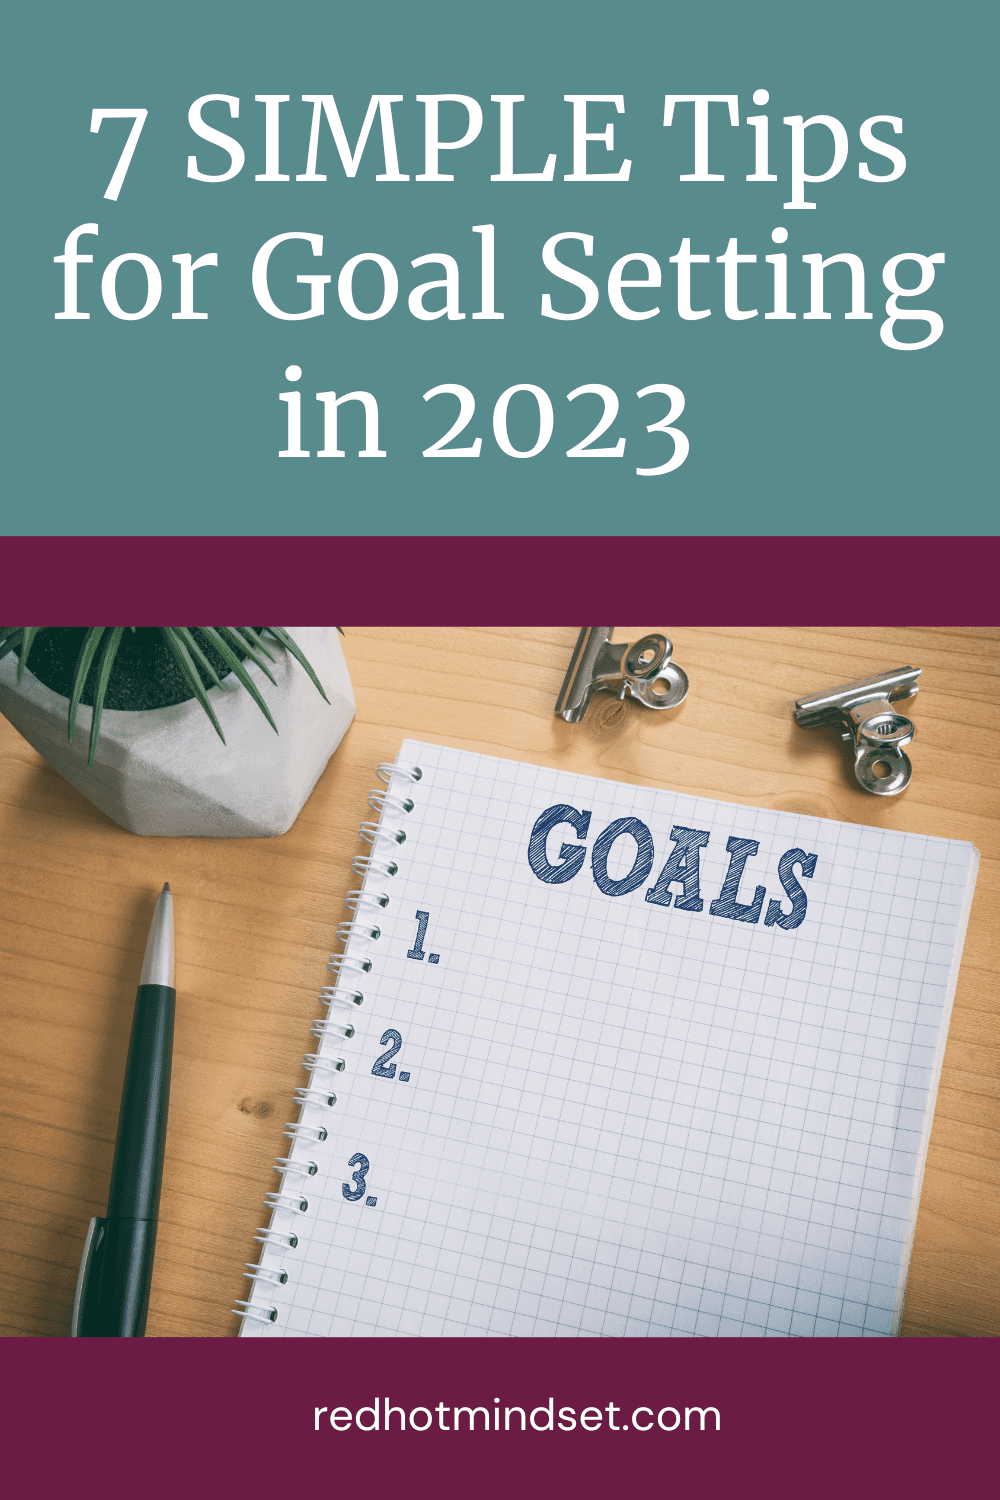 Ep 172 | 7 SIMPLE Tips for Goal Setting in 2023 (that will make the difference)